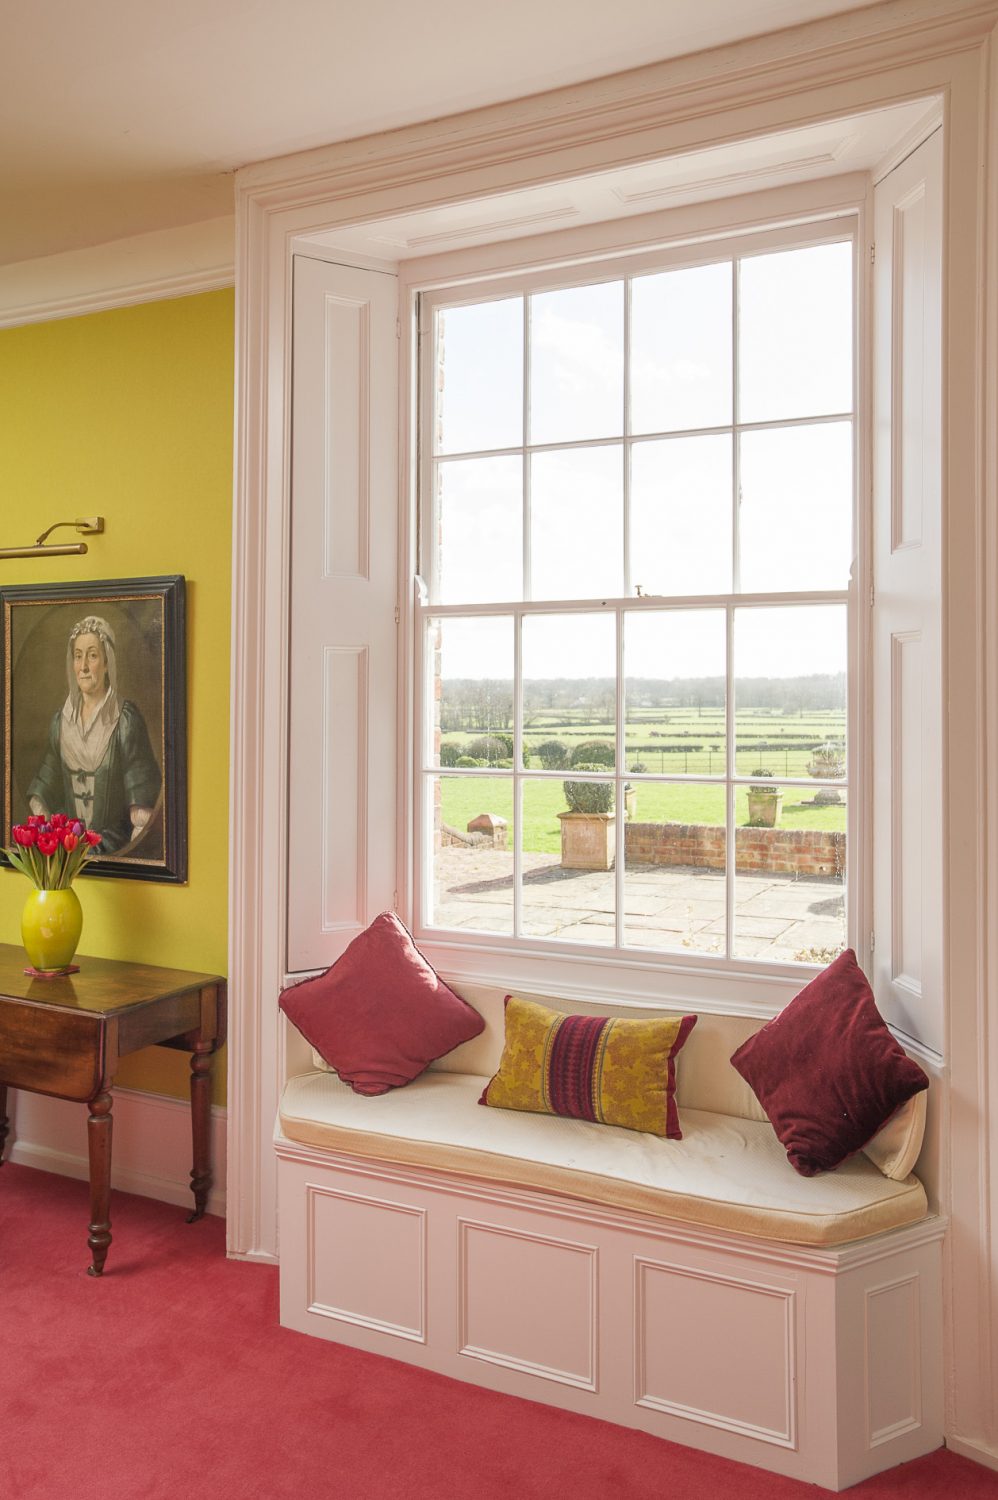 The window seat provides the ideal spot to enjoy beautiful views over rolling countryside